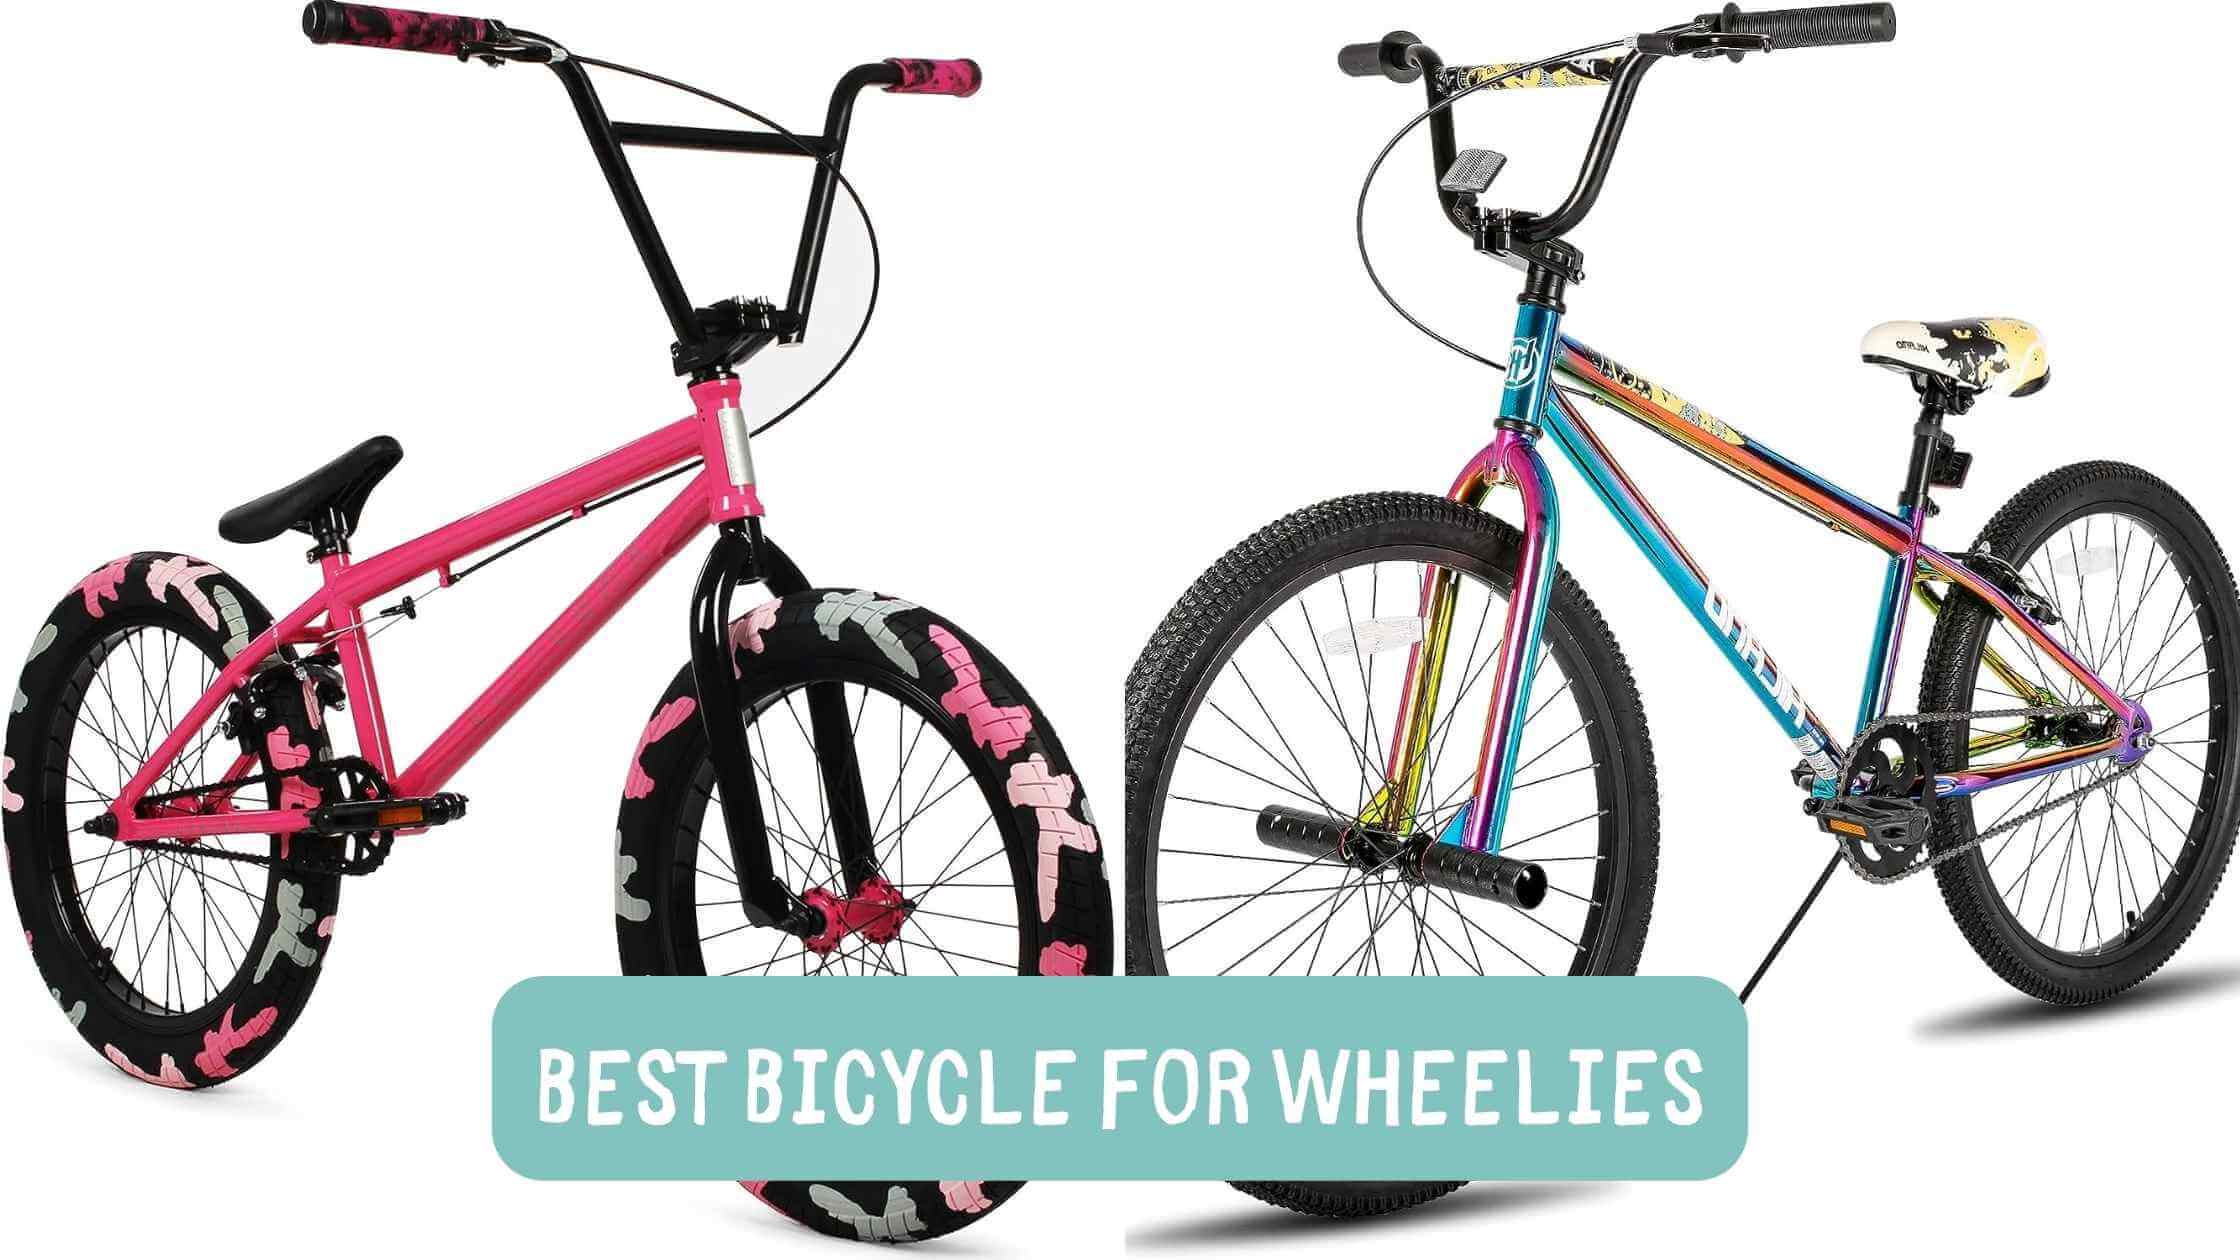 Best Bicycle for Wheelies